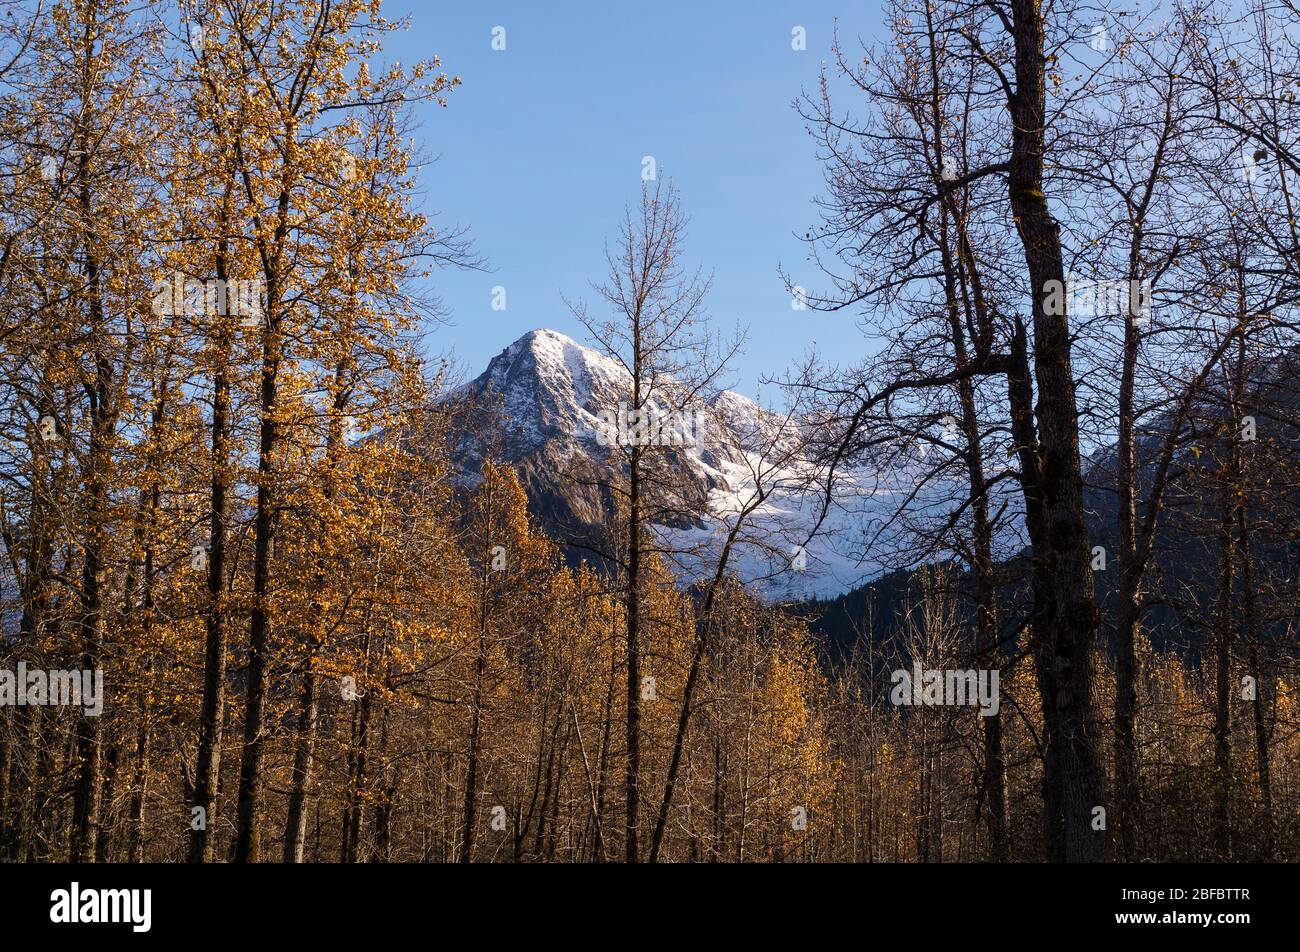 Mountain peak and glacier seen through foreground trees in autumn in the Chugach national forest, Alaska. Stock Photo